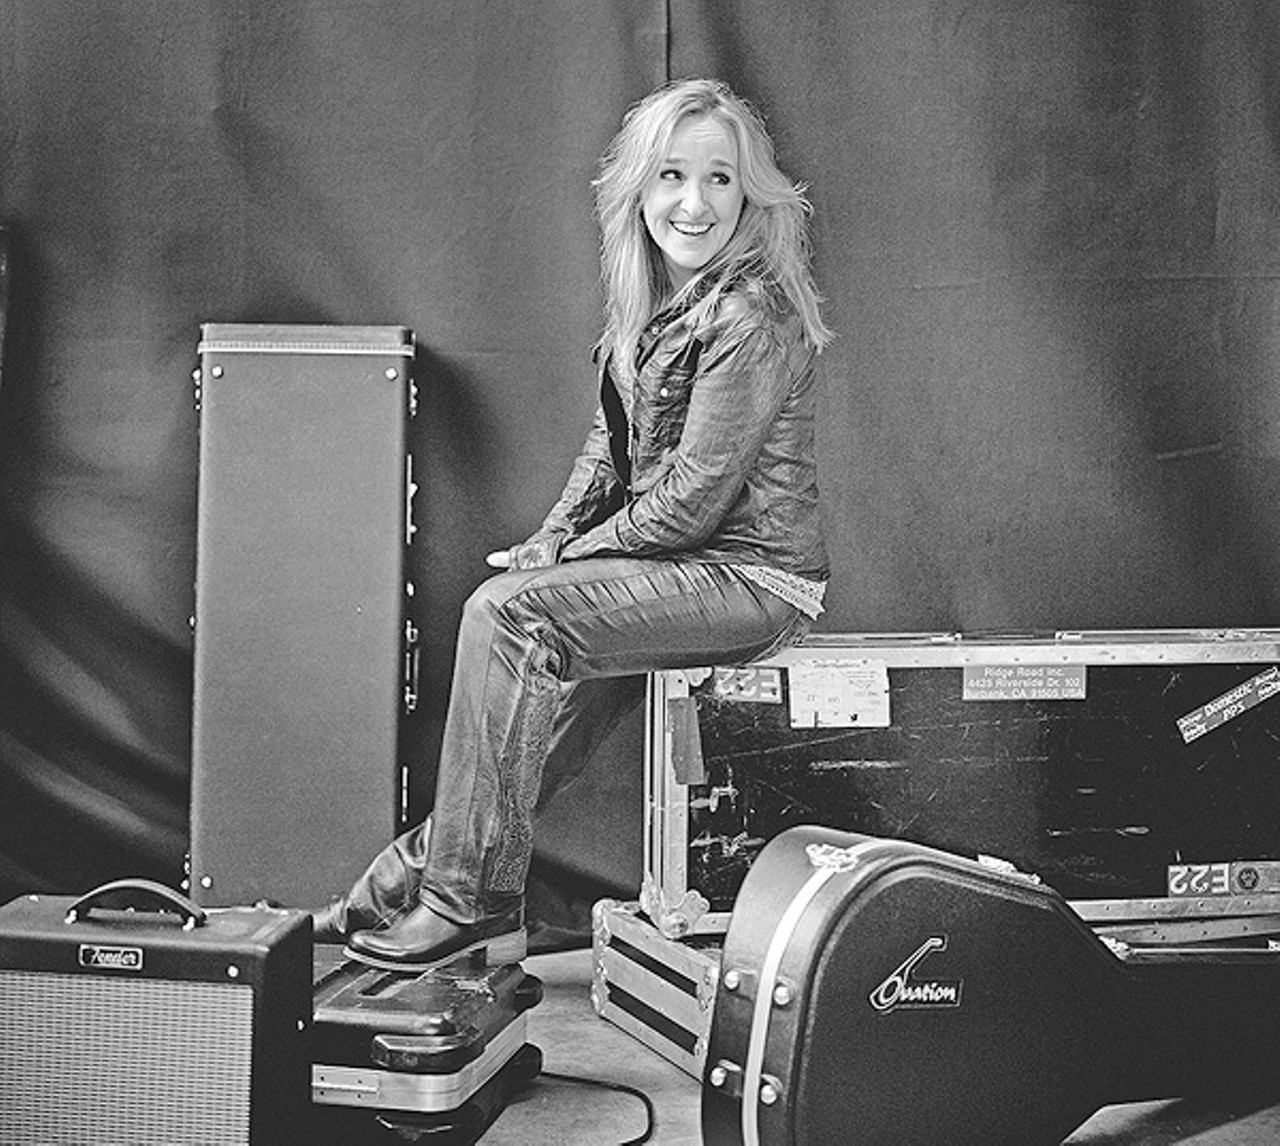 Academy Award and GRAMMY winning artist, Melissa Etheridge, will take to the State Theatre stage tonight at 8 p.m. to perform songs from her new album, This is M.E., as well as some of her greatest hits like "Come to My Window," "I'm The Only One," and "I Want to Come Over." Known for her iconic voice, profound lyrics and riveting stage presence; Melissa will share personal stories about her remarkable journey through life and the inspiration behind some of her most beloved songs. Tickets: $27.50- $100.00